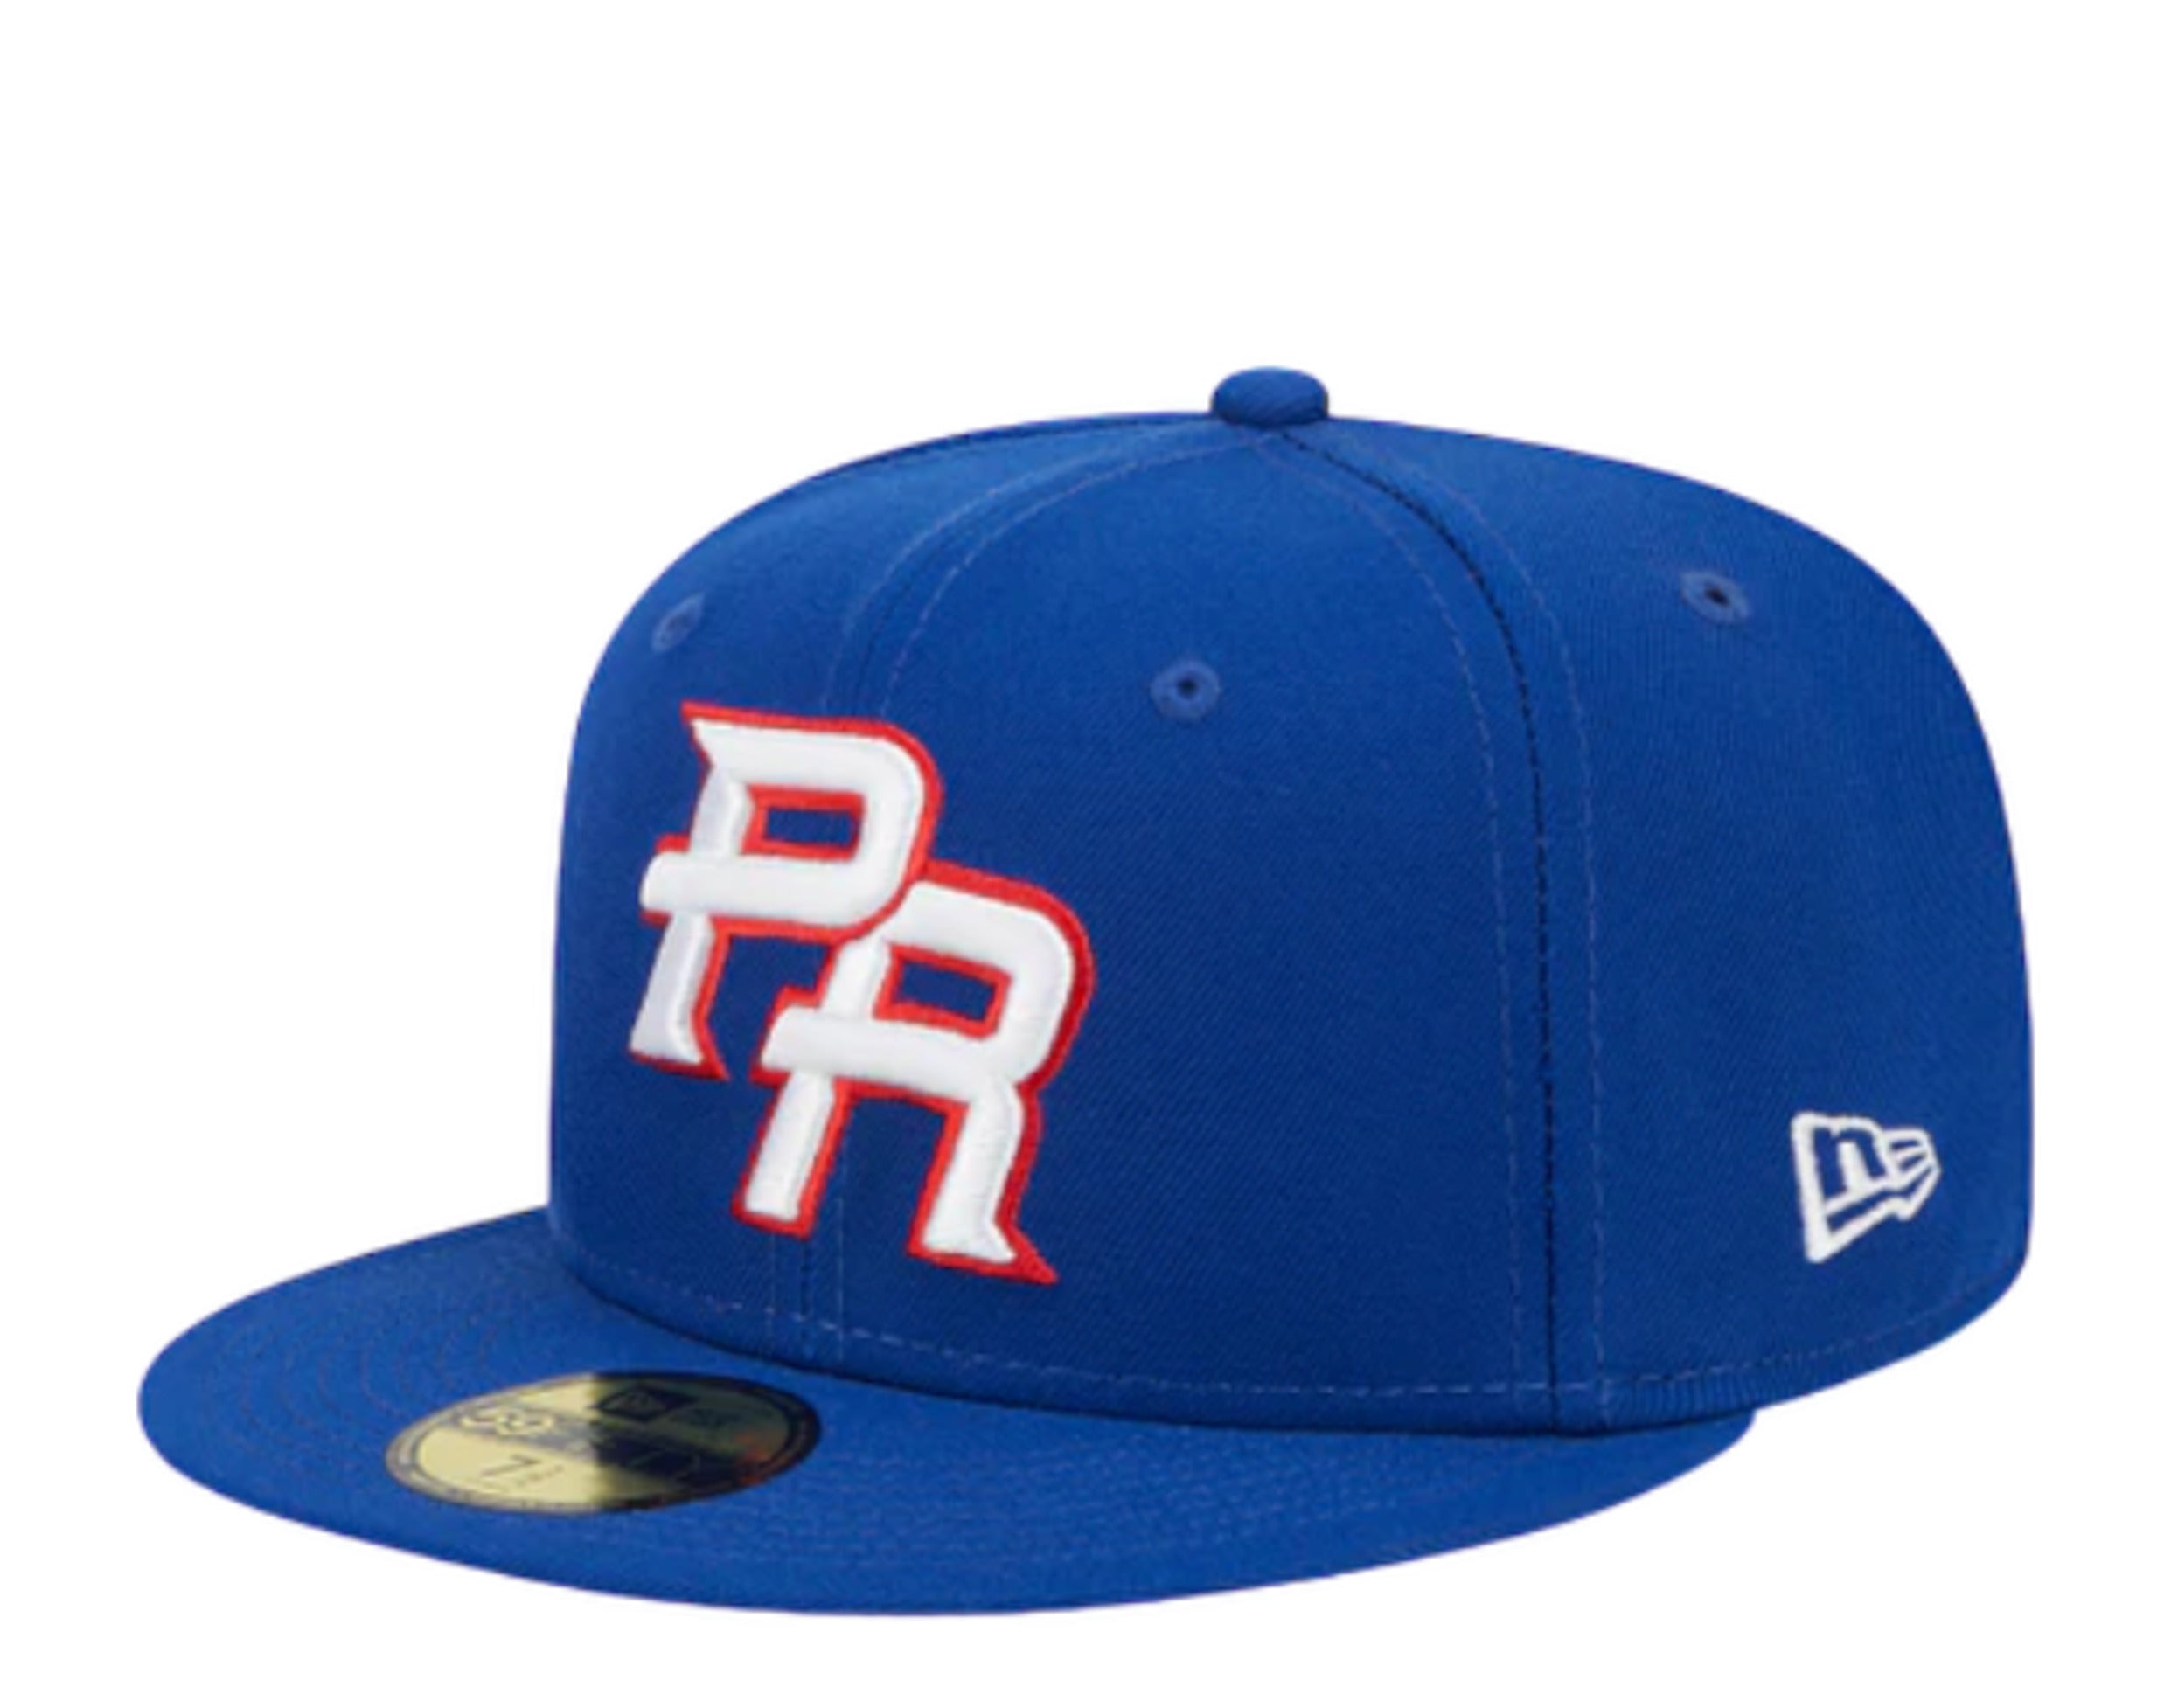 Lids San Diego Padres New Era Empire 59FIFTY Fitted Hat - Royal